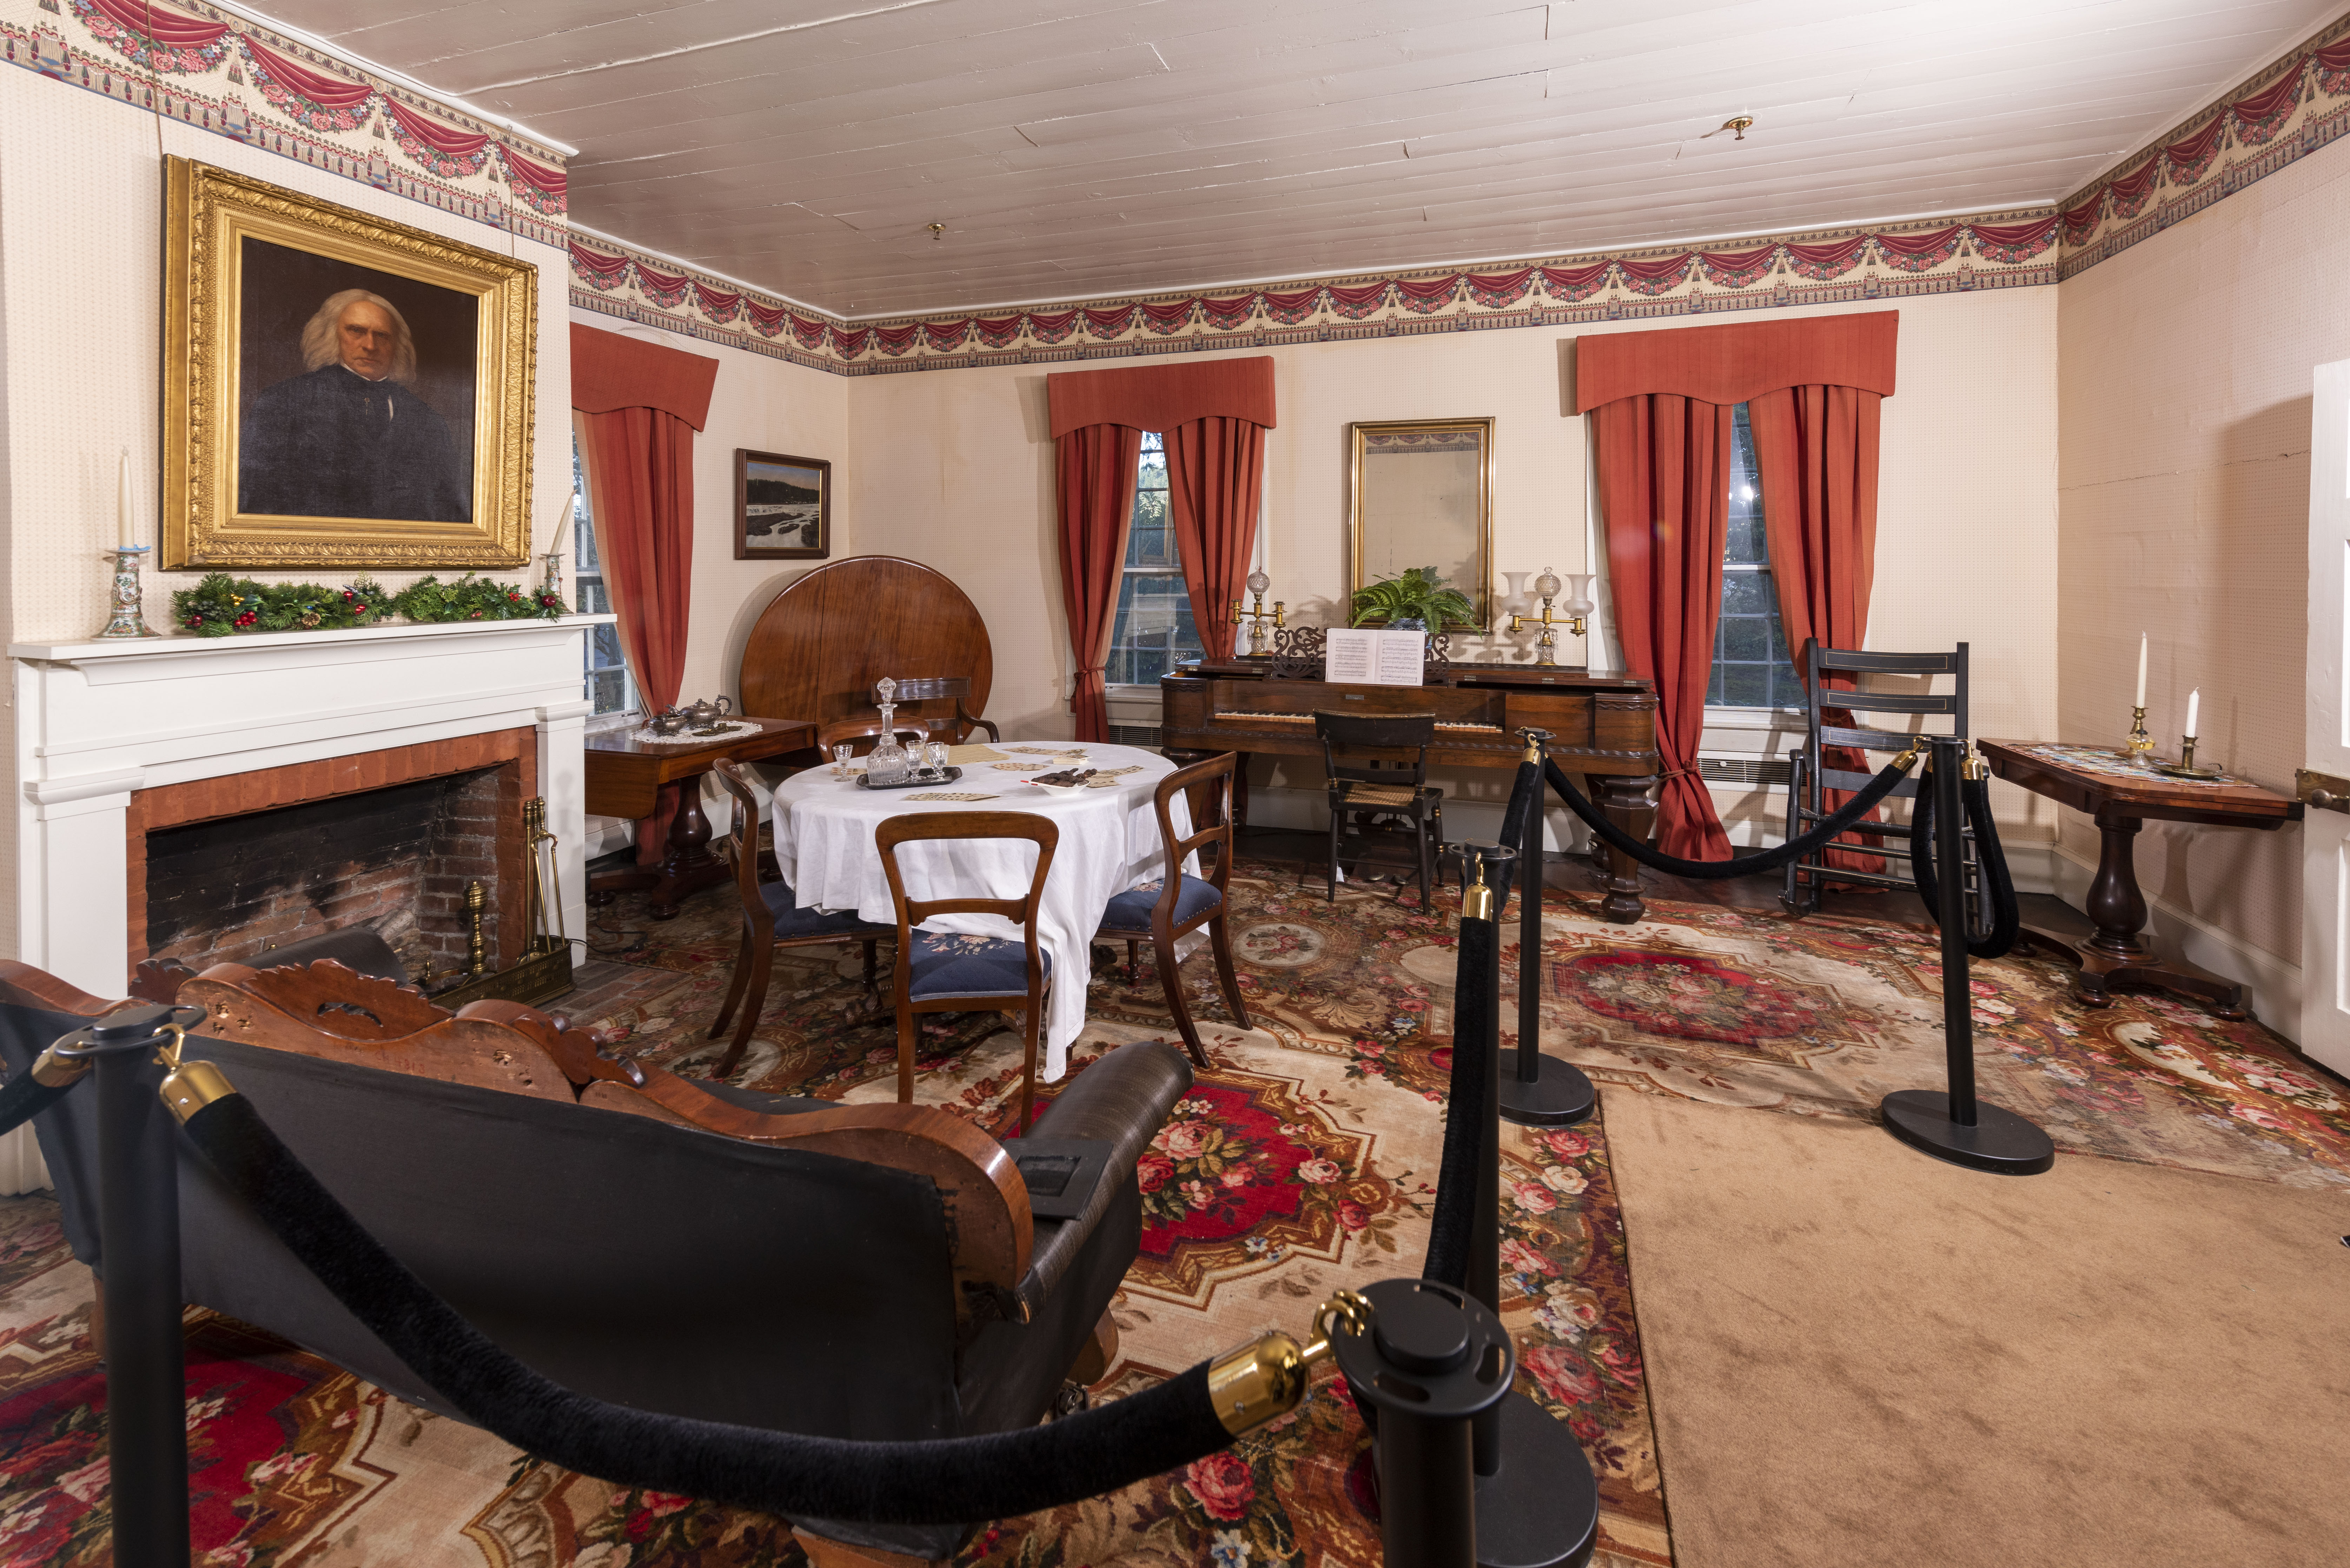 The parlor of the McLoughlin House, an ornate room with a sofa, piano, card table, and fireplace with a portrait of Dr. John McLoughlin hung over it.